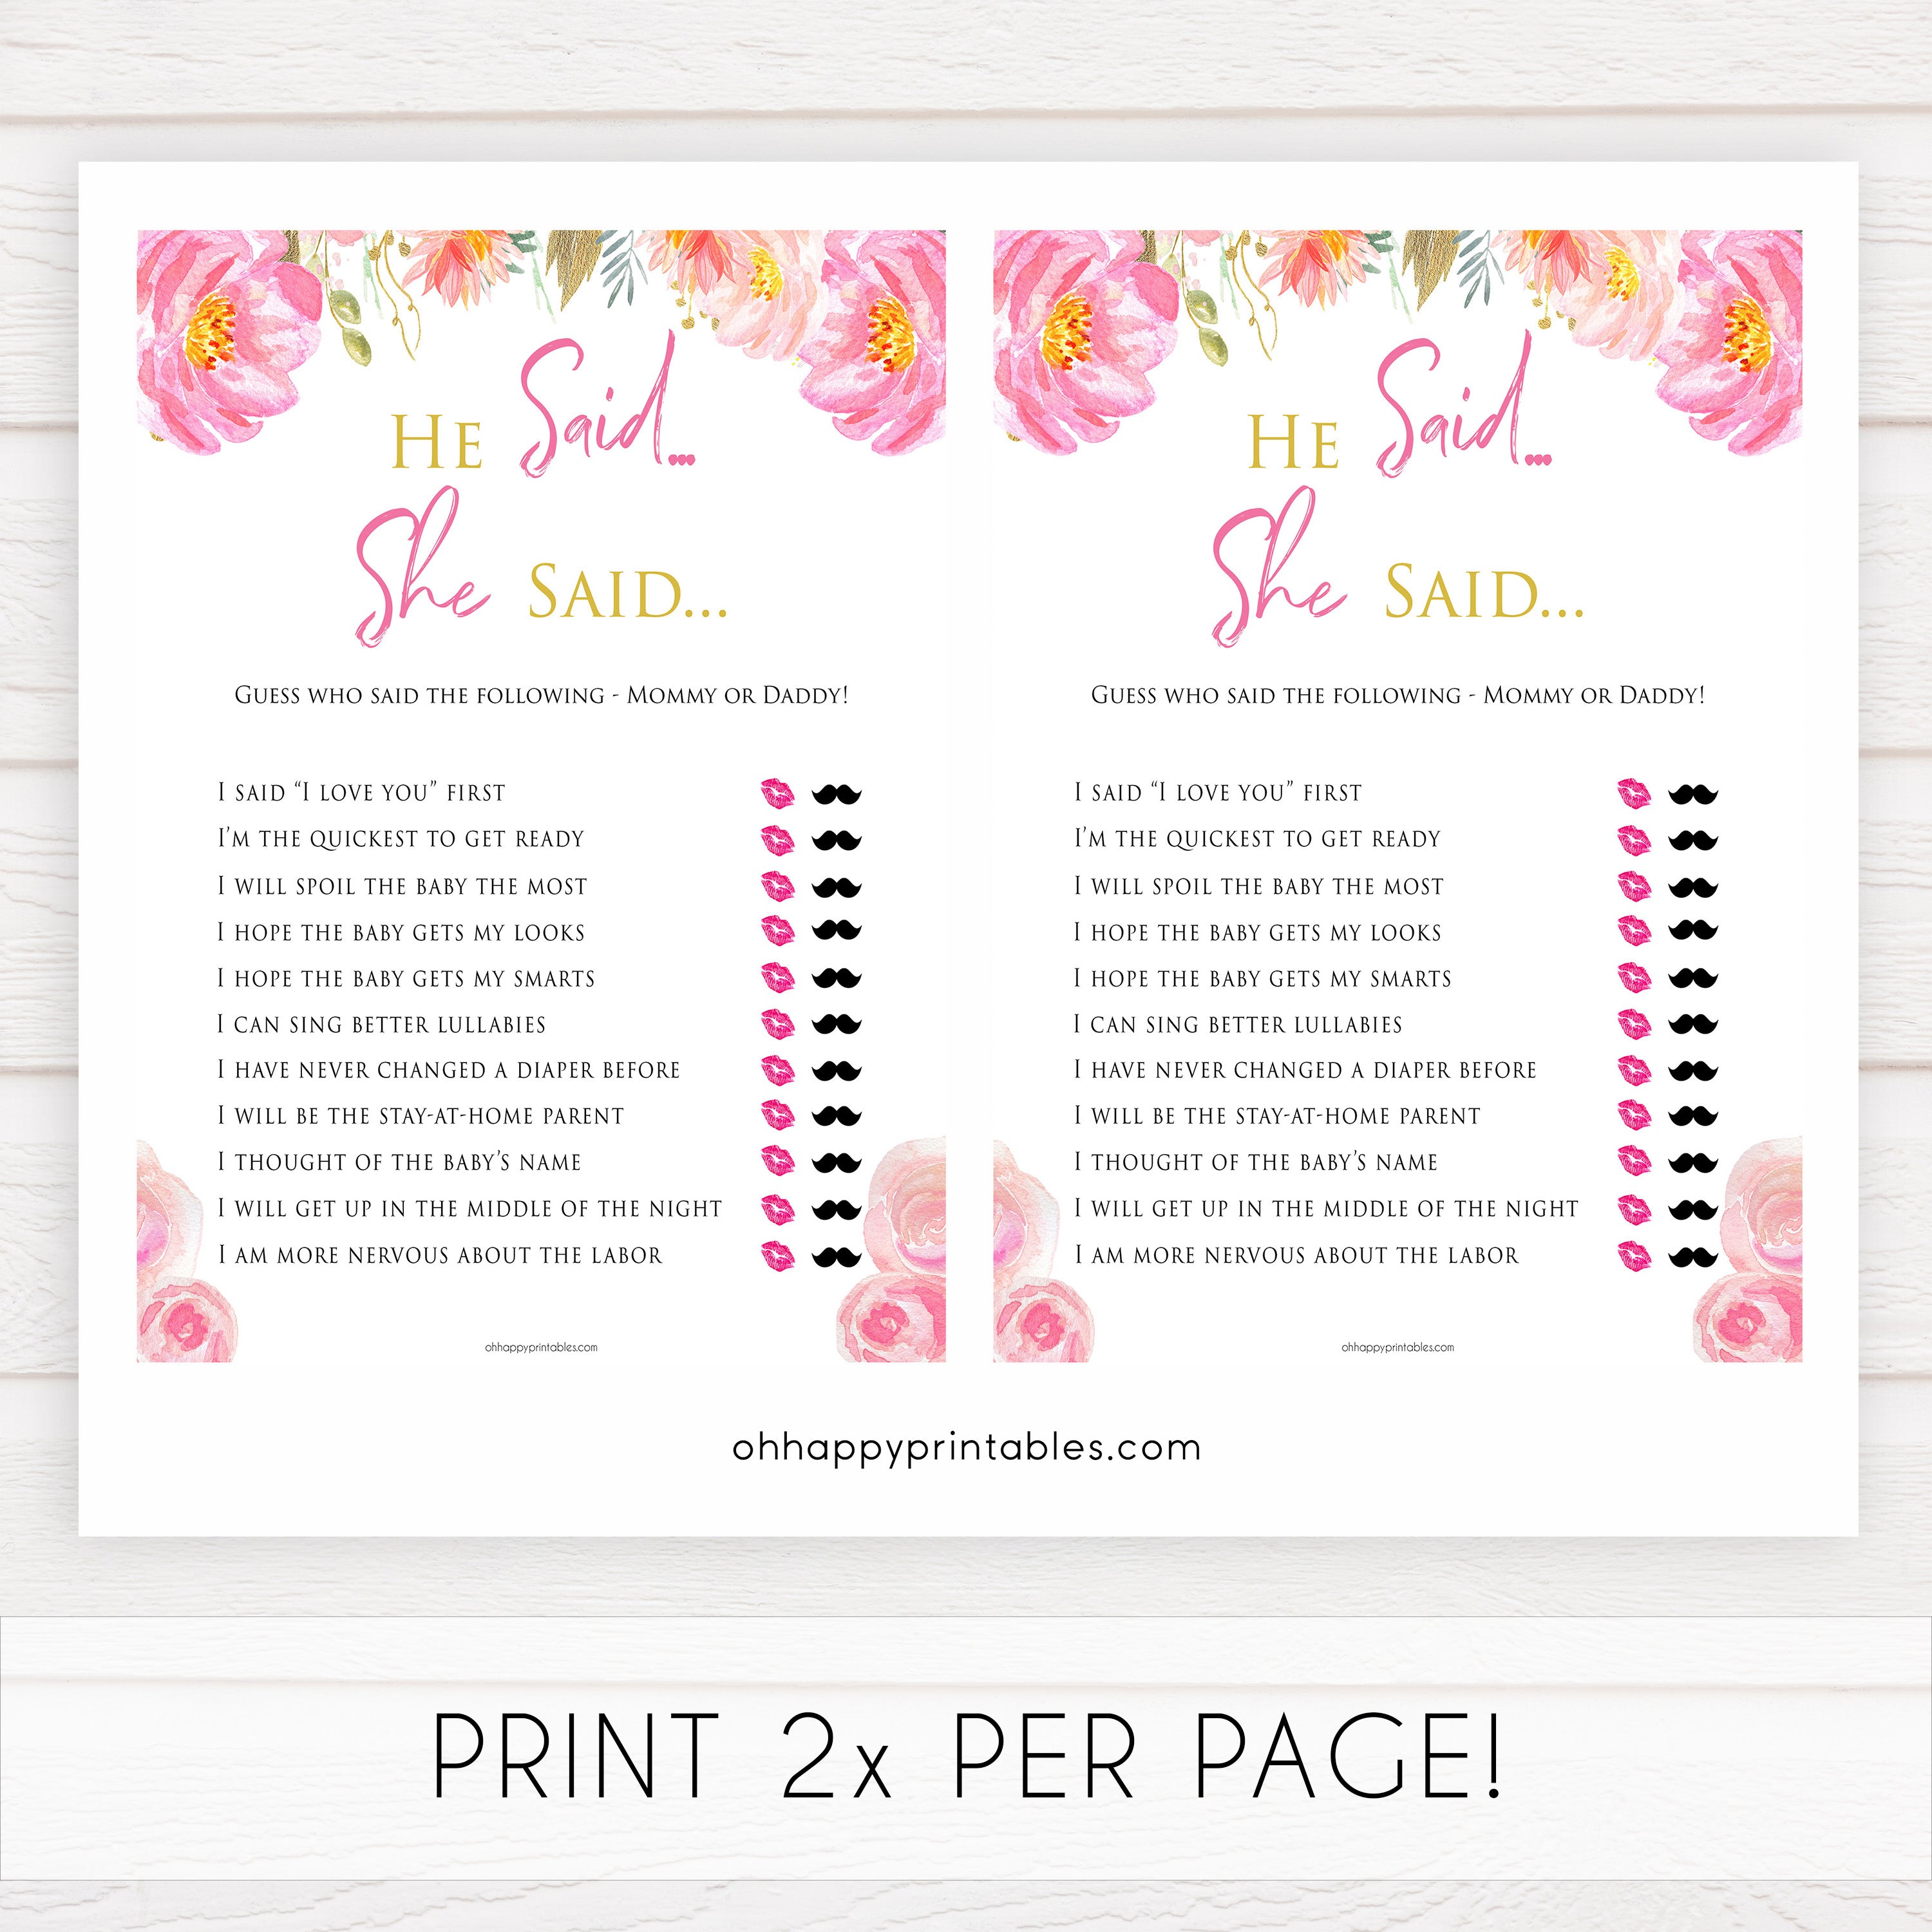 Pink blush floral baby shower he said she said, printable baby games, baby shower games, blush baby shower, floral baby games, girl baby shower ideas, pink baby shower ideas, floral baby games, popular baby games, fun baby games